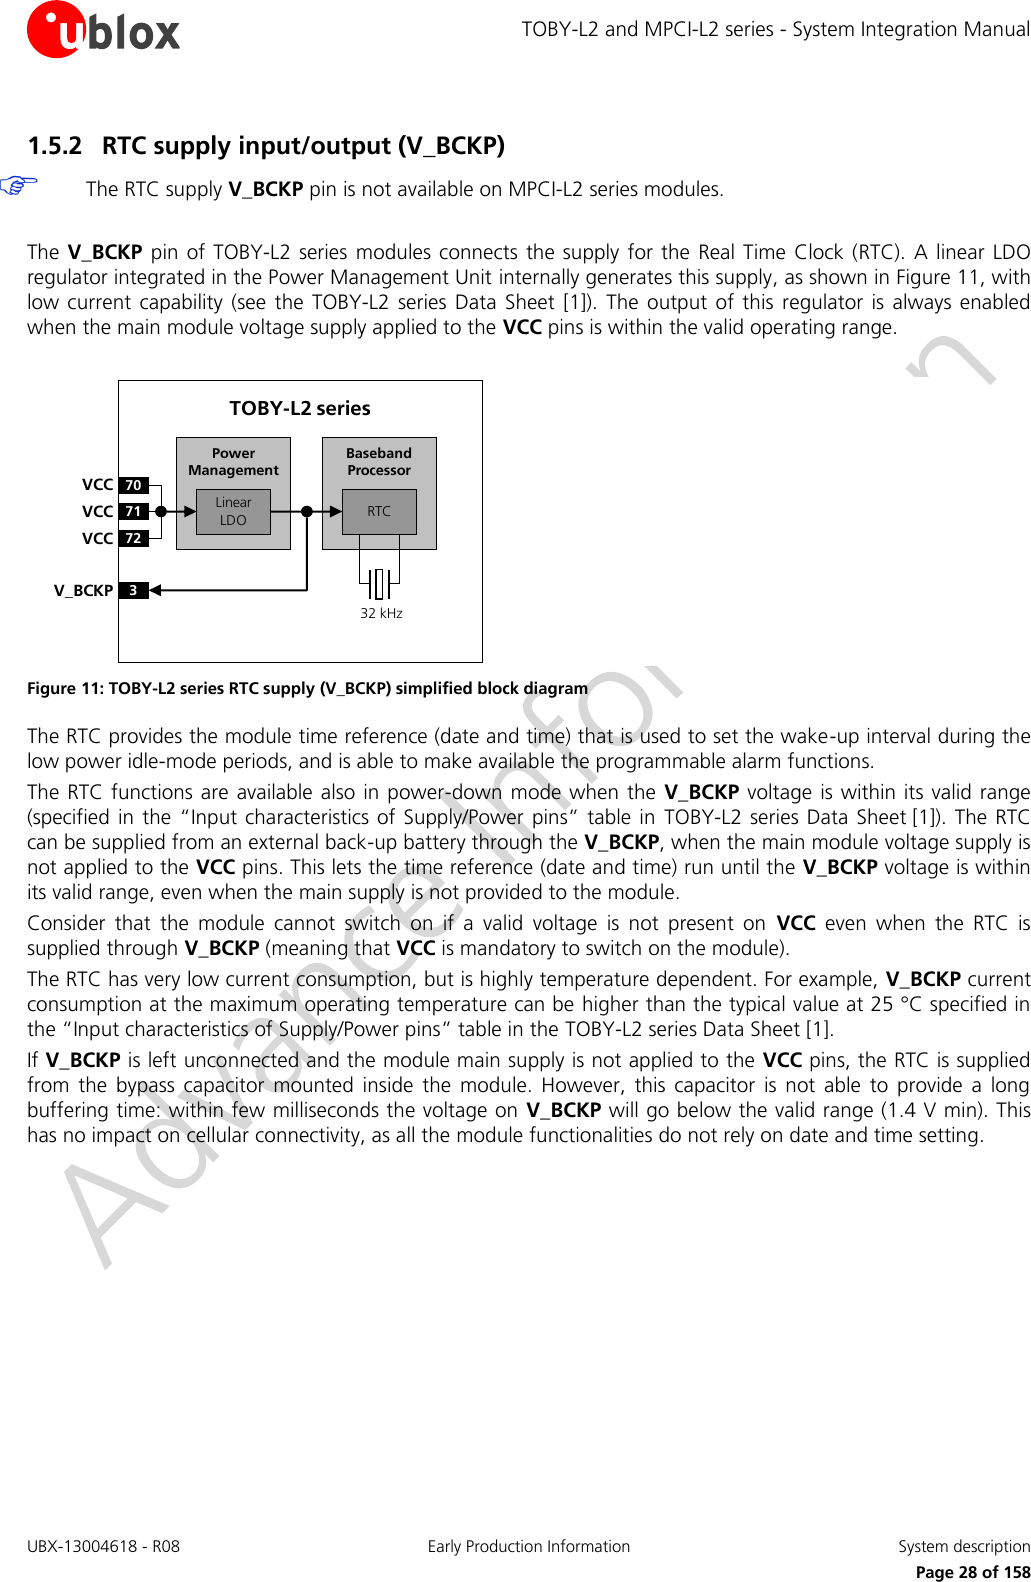 TOBY-L2 and MPCI-L2 series - System Integration Manual UBX-13004618 - R08  Early Production Information  System description     Page 28 of 158 1.5.2 RTC supply input/output (V_BCKP)   The RTC supply V_BCKP pin is not available on MPCI-L2 series modules.  The V_BCKP  pin  of  TOBY-L2 series  modules connects  the supply for the  Real Time Clock (RTC). A linear LDO regulator integrated in the Power Management Unit internally generates this supply, as shown in Figure 11, with low current  capability  (see  the  TOBY-L2  series  Data  Sheet  [1]).  The  output  of  this  regulator  is  always  enabled when the main module voltage supply applied to the VCC pins is within the valid operating range.  Baseband Processor70VCC71VCC72VCC3V_BCKPLinear LDOPower ManagementTOBY-L2 series32 kHzRTC Figure 11: TOBY-L2 series RTC supply (V_BCKP) simplified block diagram The RTC provides the module time reference (date and time) that is used to set the wake-up interval during the low power idle-mode periods, and is able to make available the programmable alarm functions. The RTC functions are available also in power-down  mode  when  the  V_BCKP  voltage is within its  valid range (specified in the “Input characteristics of  Supply/Power pins” table in  TOBY-L2  series Data Sheet [1]). The  RTC can be supplied from an external back-up battery through the V_BCKP, when the main module voltage supply is not applied to the VCC pins. This lets the time reference (date and time) run until the V_BCKP voltage is within its valid range, even when the main supply is not provided to the module. Consider  that  the  module  cannot  switch  on  if  a  valid  voltage  is  not  present  on  VCC  even  when  the  RTC  is supplied through V_BCKP (meaning that VCC is mandatory to switch on the module). The RTC has very low current consumption, but is highly temperature dependent. For example, V_BCKP current consumption at the maximum operating temperature can be higher than the typical value at 25 °C specified in the “Input characteristics of Supply/Power pins” table in the TOBY-L2 series Data Sheet [1]. If V_BCKP is left unconnected and the module main supply is not applied to the VCC pins, the RTC is supplied from  the  bypass  capacitor  mounted  inside  the  module.  However,  this  capacitor  is  not  able  to  provide  a  long buffering time: within few milliseconds the voltage on V_BCKP will go below the valid range (1.4 V min). This has no impact on cellular connectivity, as all the module functionalities do not rely on date and time setting.  